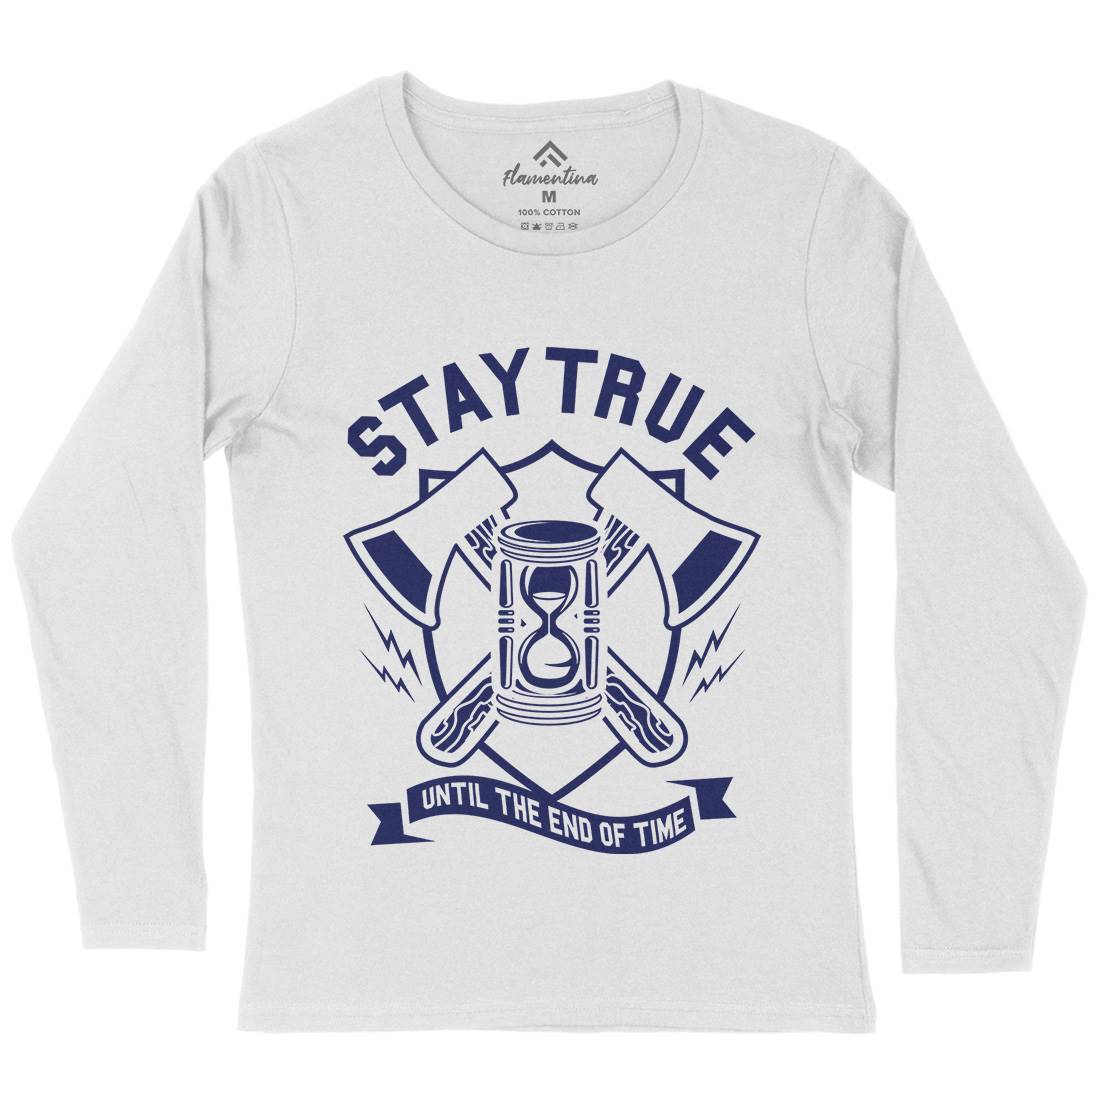 Stay True Womens Long Sleeve T-Shirt Quotes A285